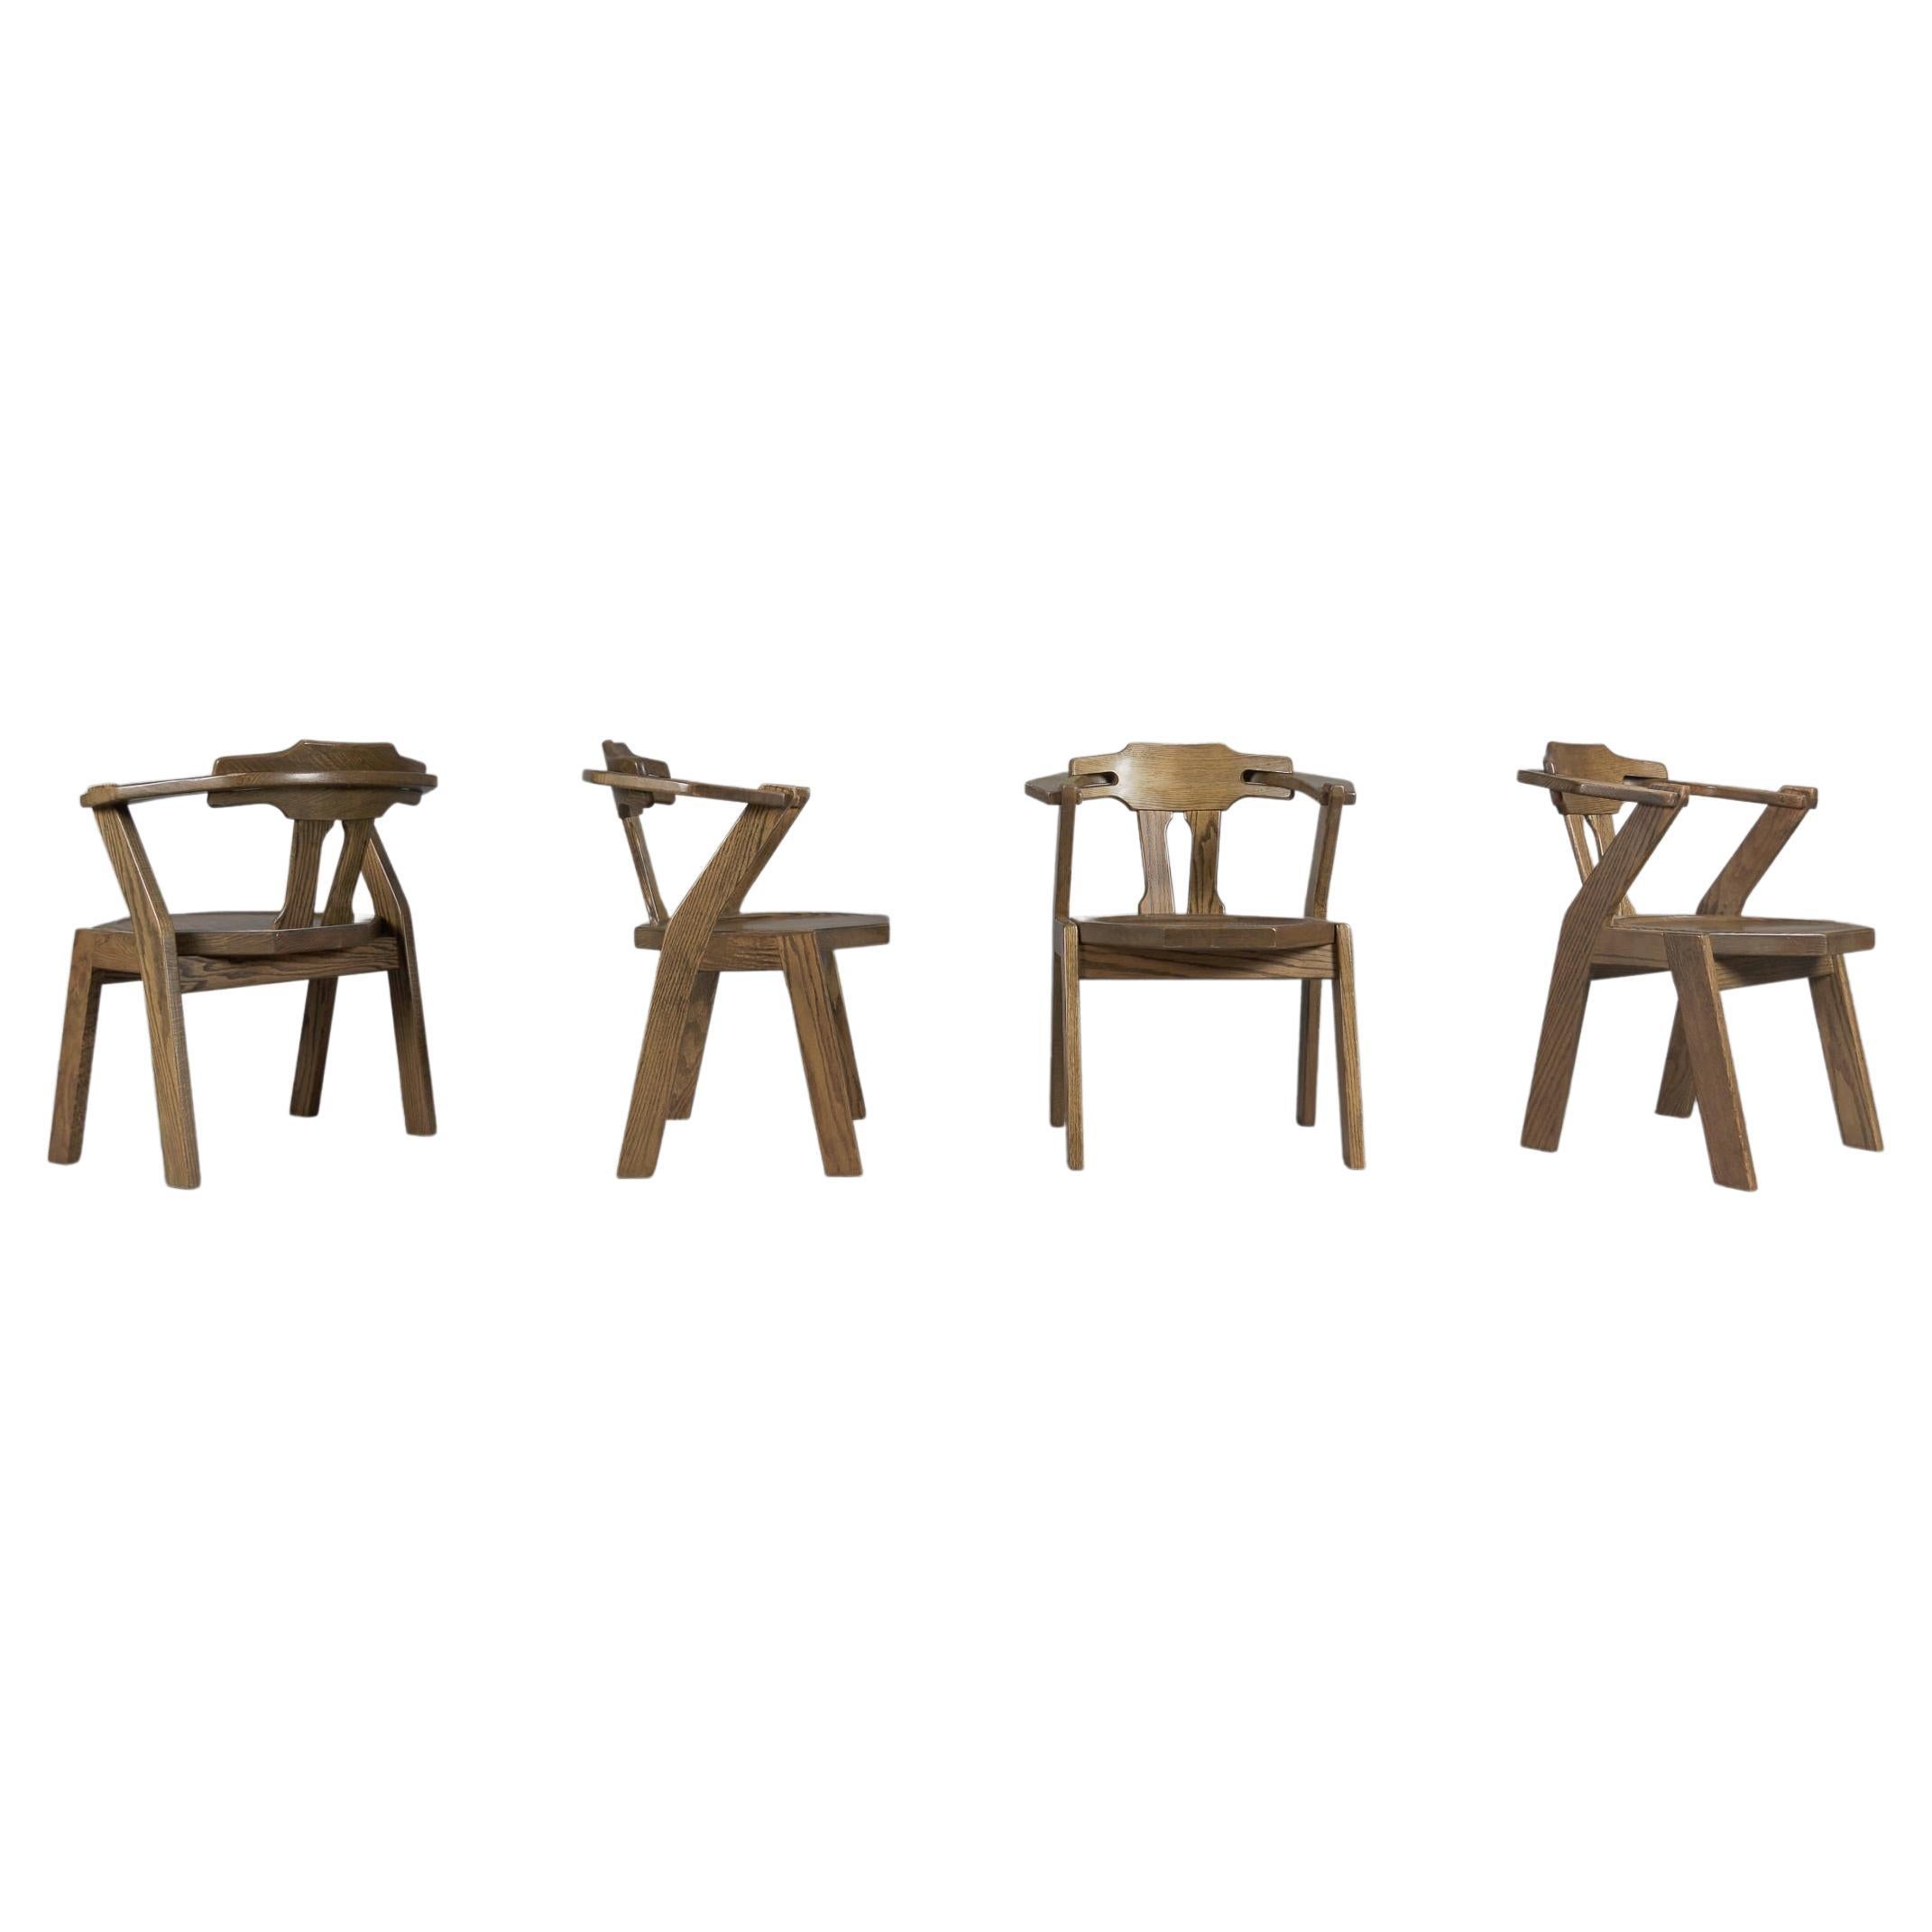 Brutalist Set of 4 Chairs with Oak Armrests, 1960s